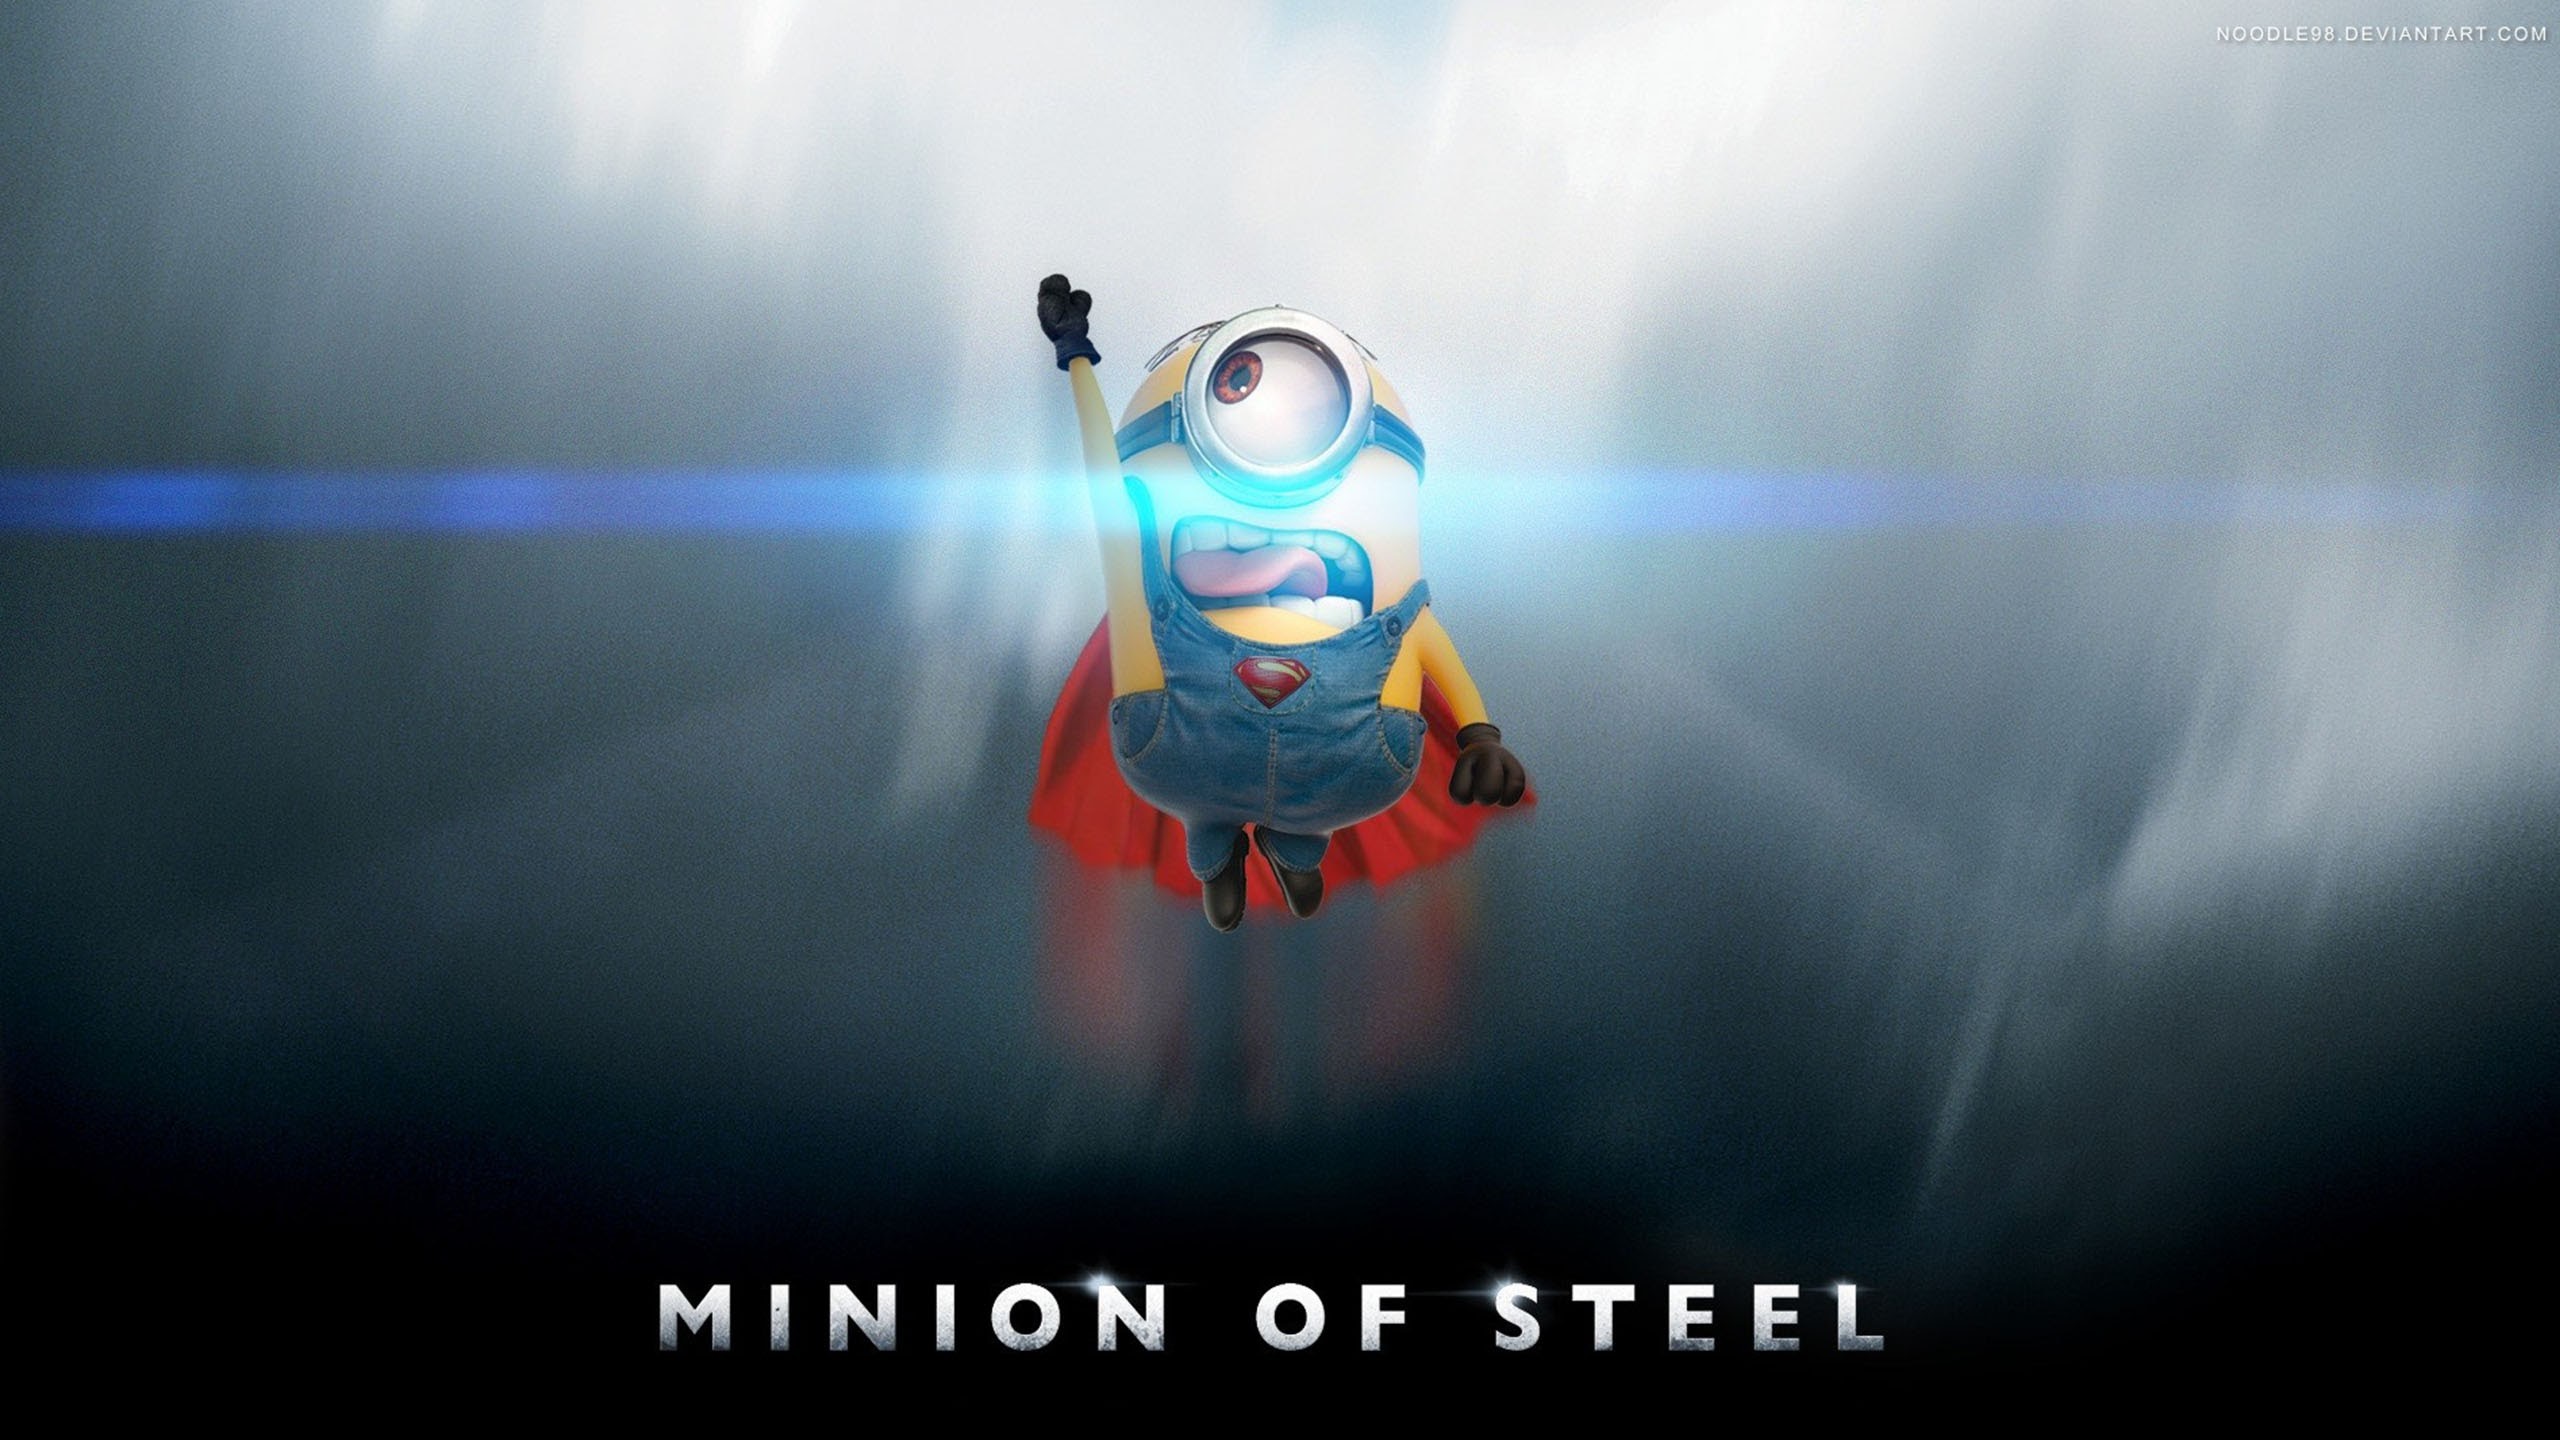 General 2560x1440 minions humor tongue out cyan movie characters superhero Universal Pictures DC Comics crossover